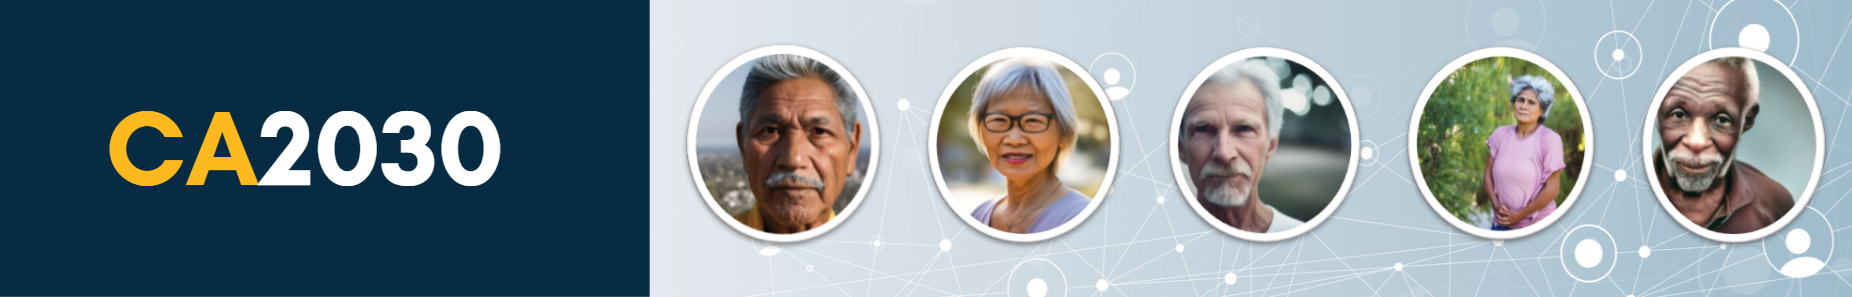 CA 2030 text with images of diverse older adults